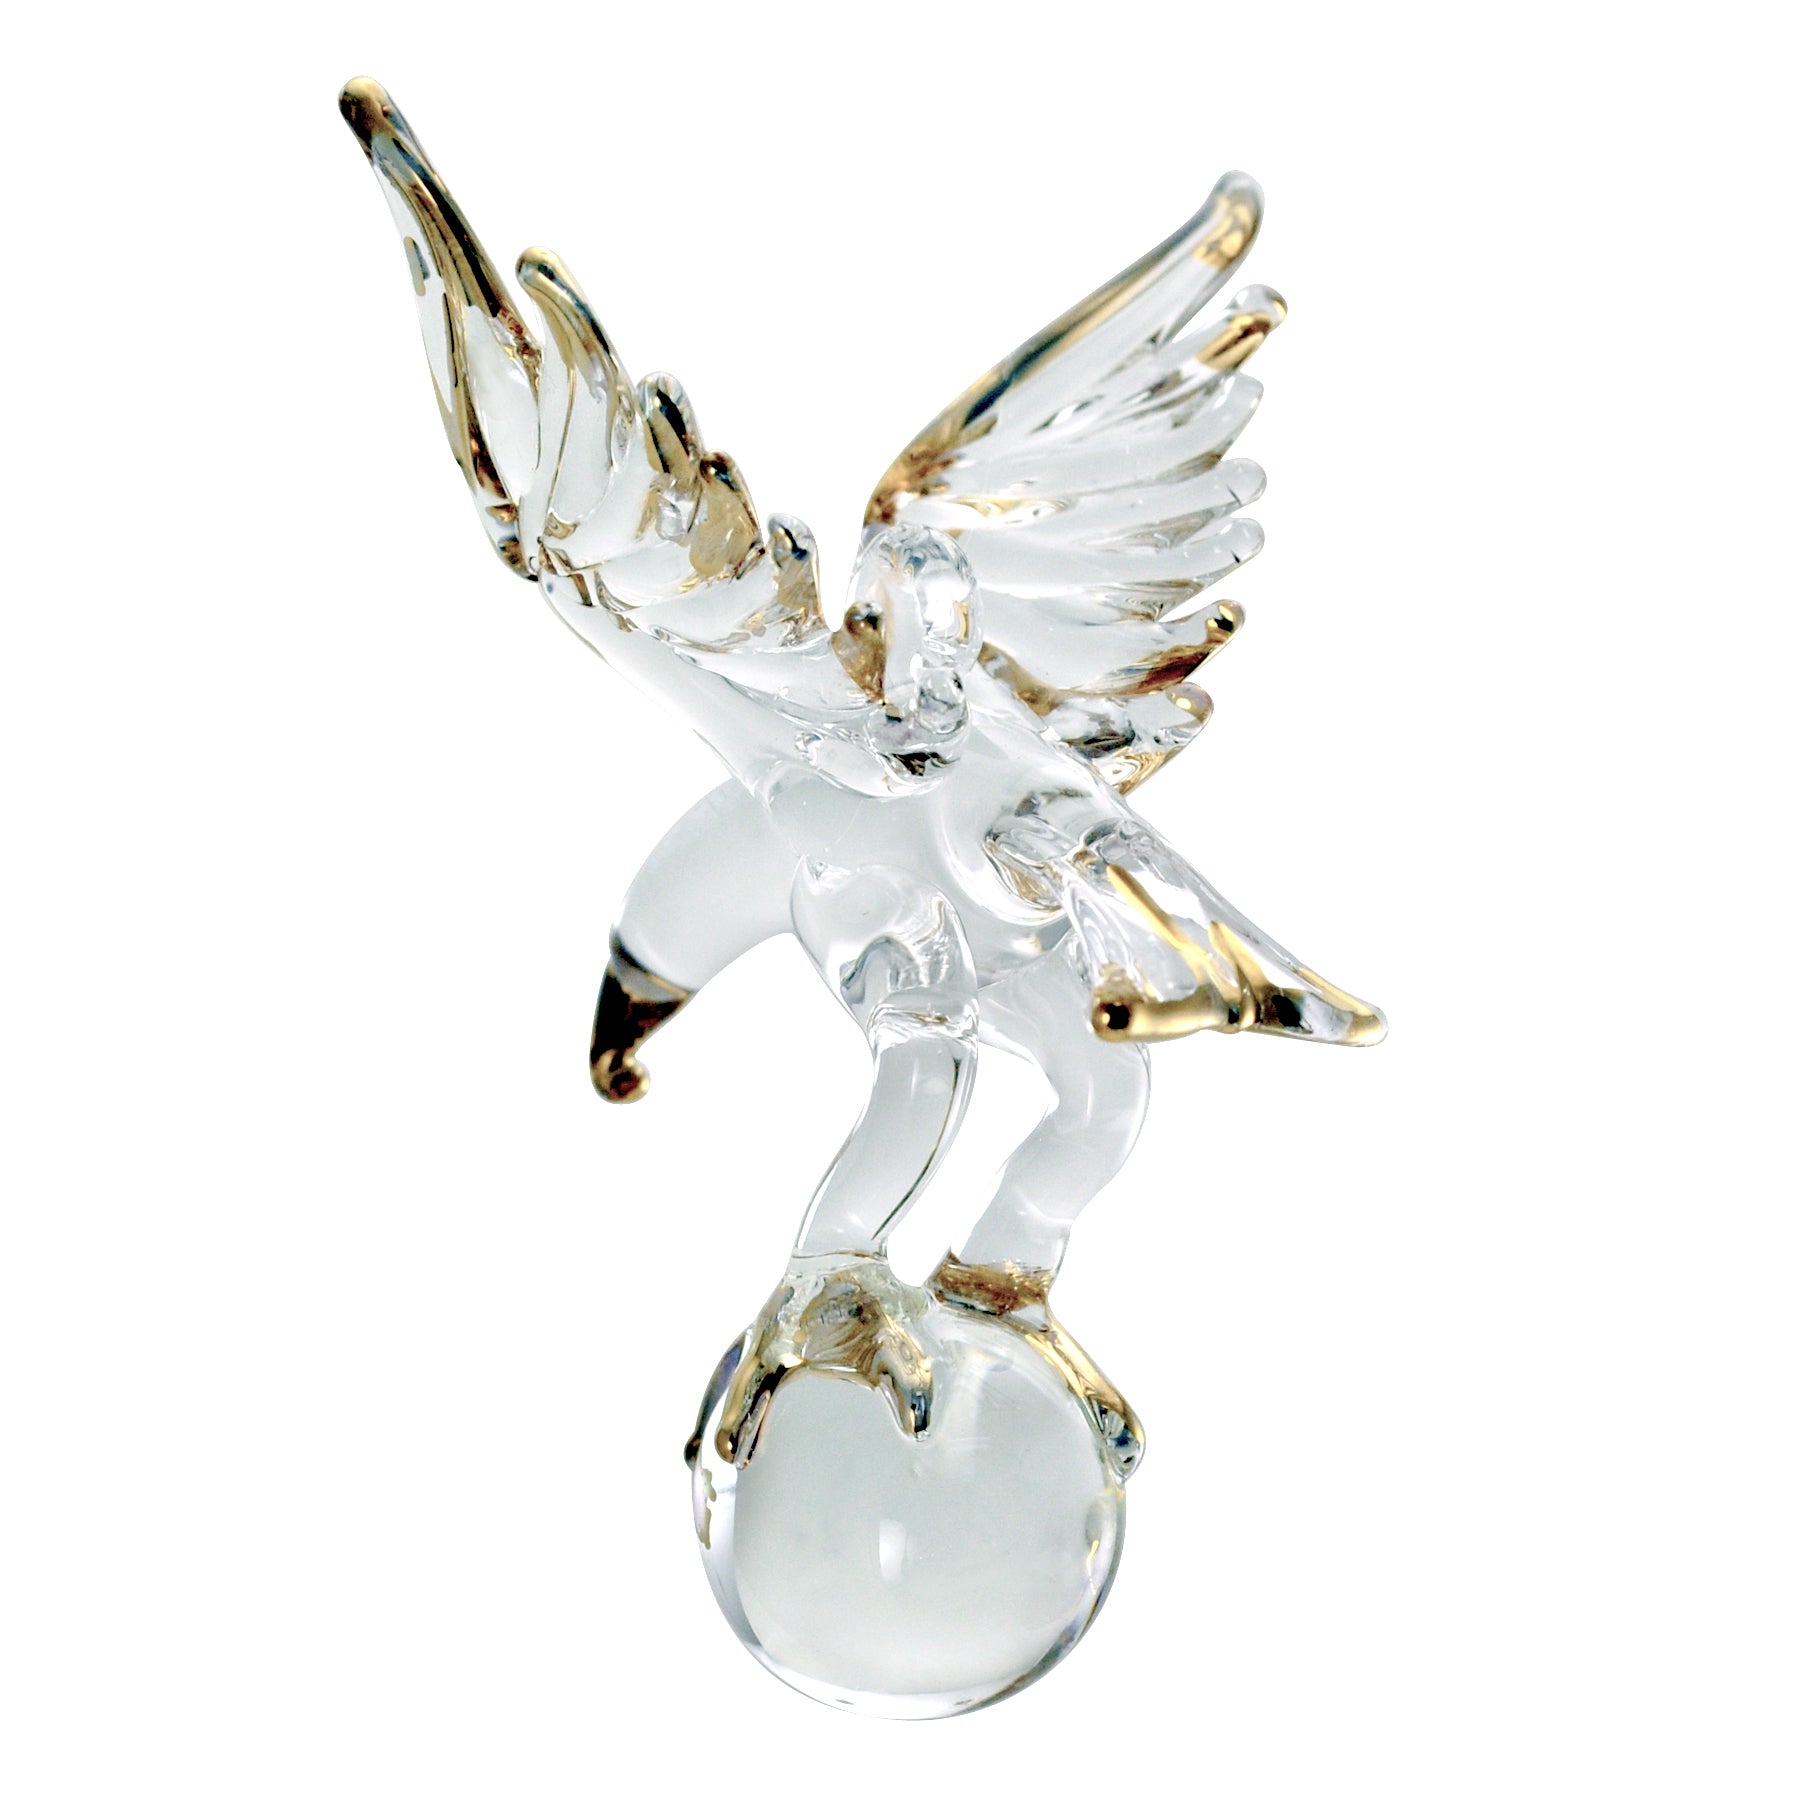 Crystal Castle Glass Eagle with gold trim details on beak, wings and tail. on a crystal ball. Back View